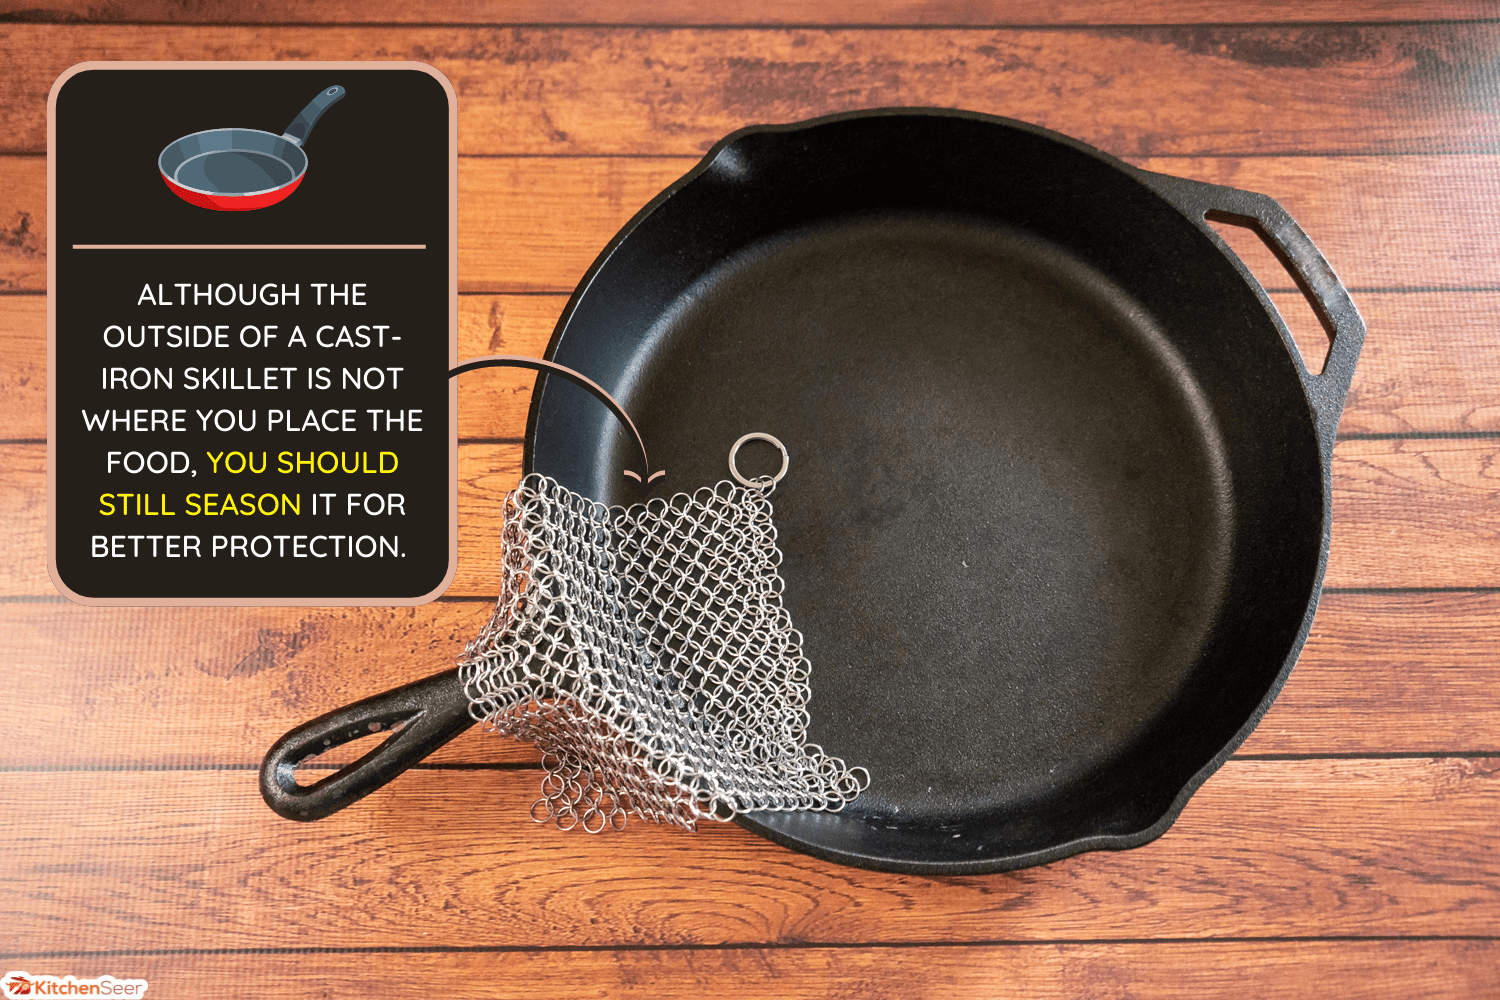 Small Ring Chainmail Scrubber - for Cast Iron, Stainless Steel, Hard Anodized Cookware and Other Pots & Pans. For for Cast Iron Cookware, Dutch Ovens, Casseroles, Stainless Steel Cookware, & Woks. - Do You Season The Outside Of A Cast Iron Skillet